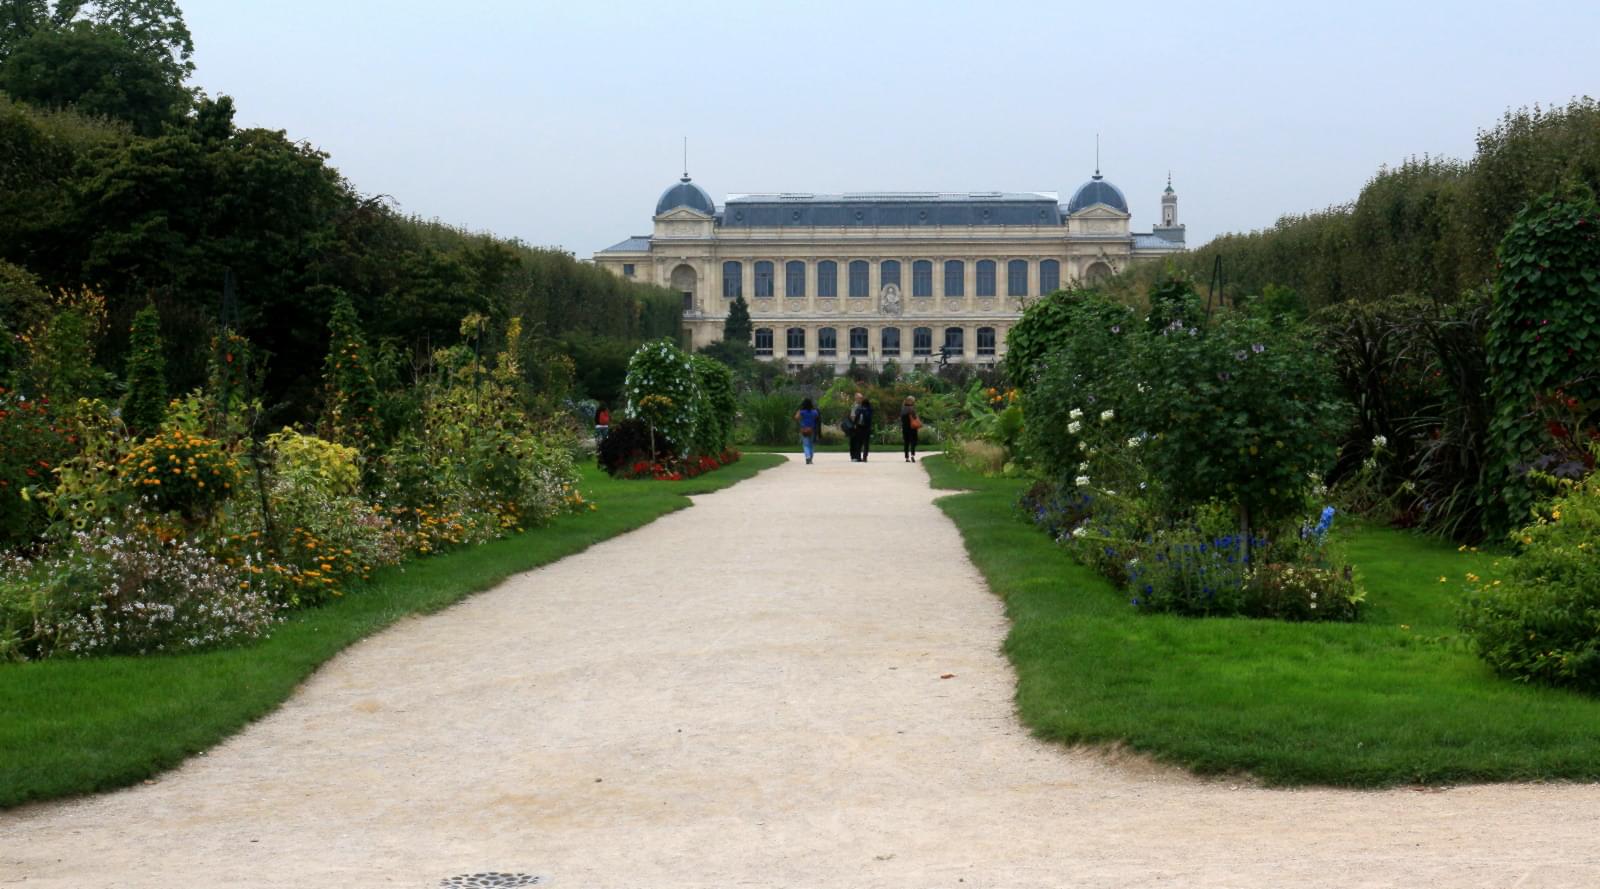 The Botanical Gardens and Greenhouses